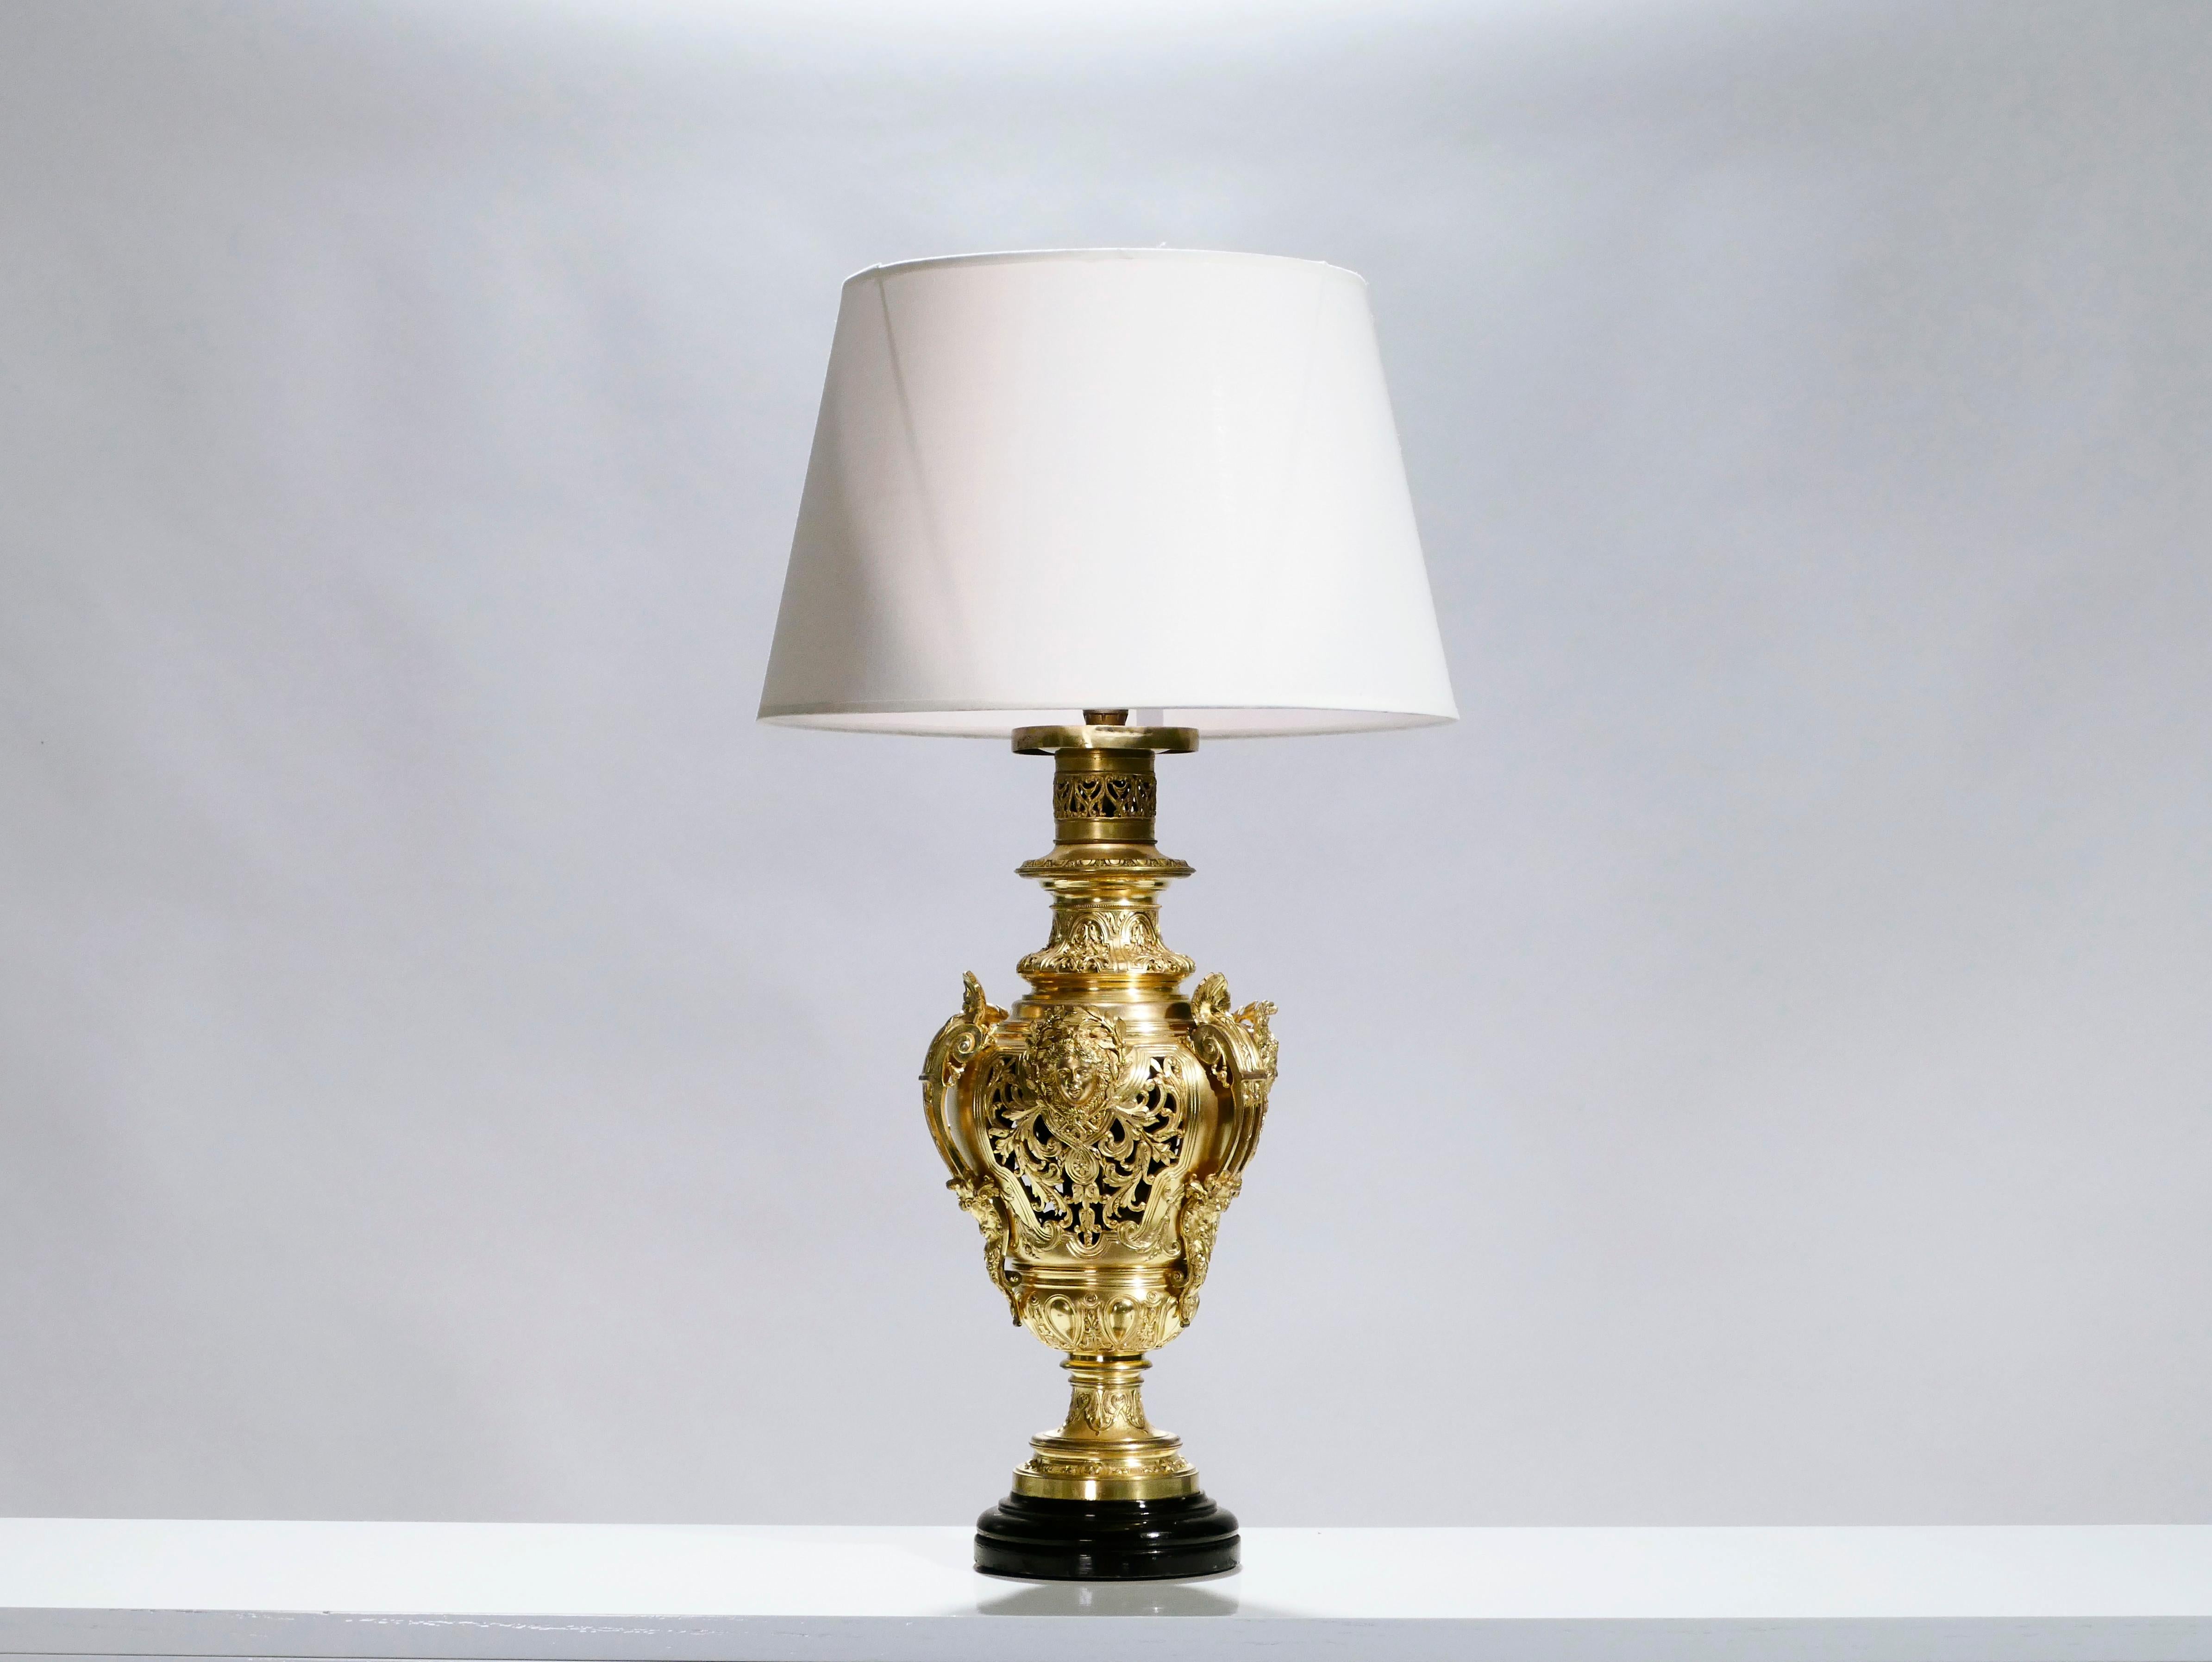 This French Napoleon III antique lamp from the 19th century was originally an oil lamp, but it has since been converted to electric for use in a contemporary space. The beautifully ornate chiselled bronze is what makes this piece special. Leaves and